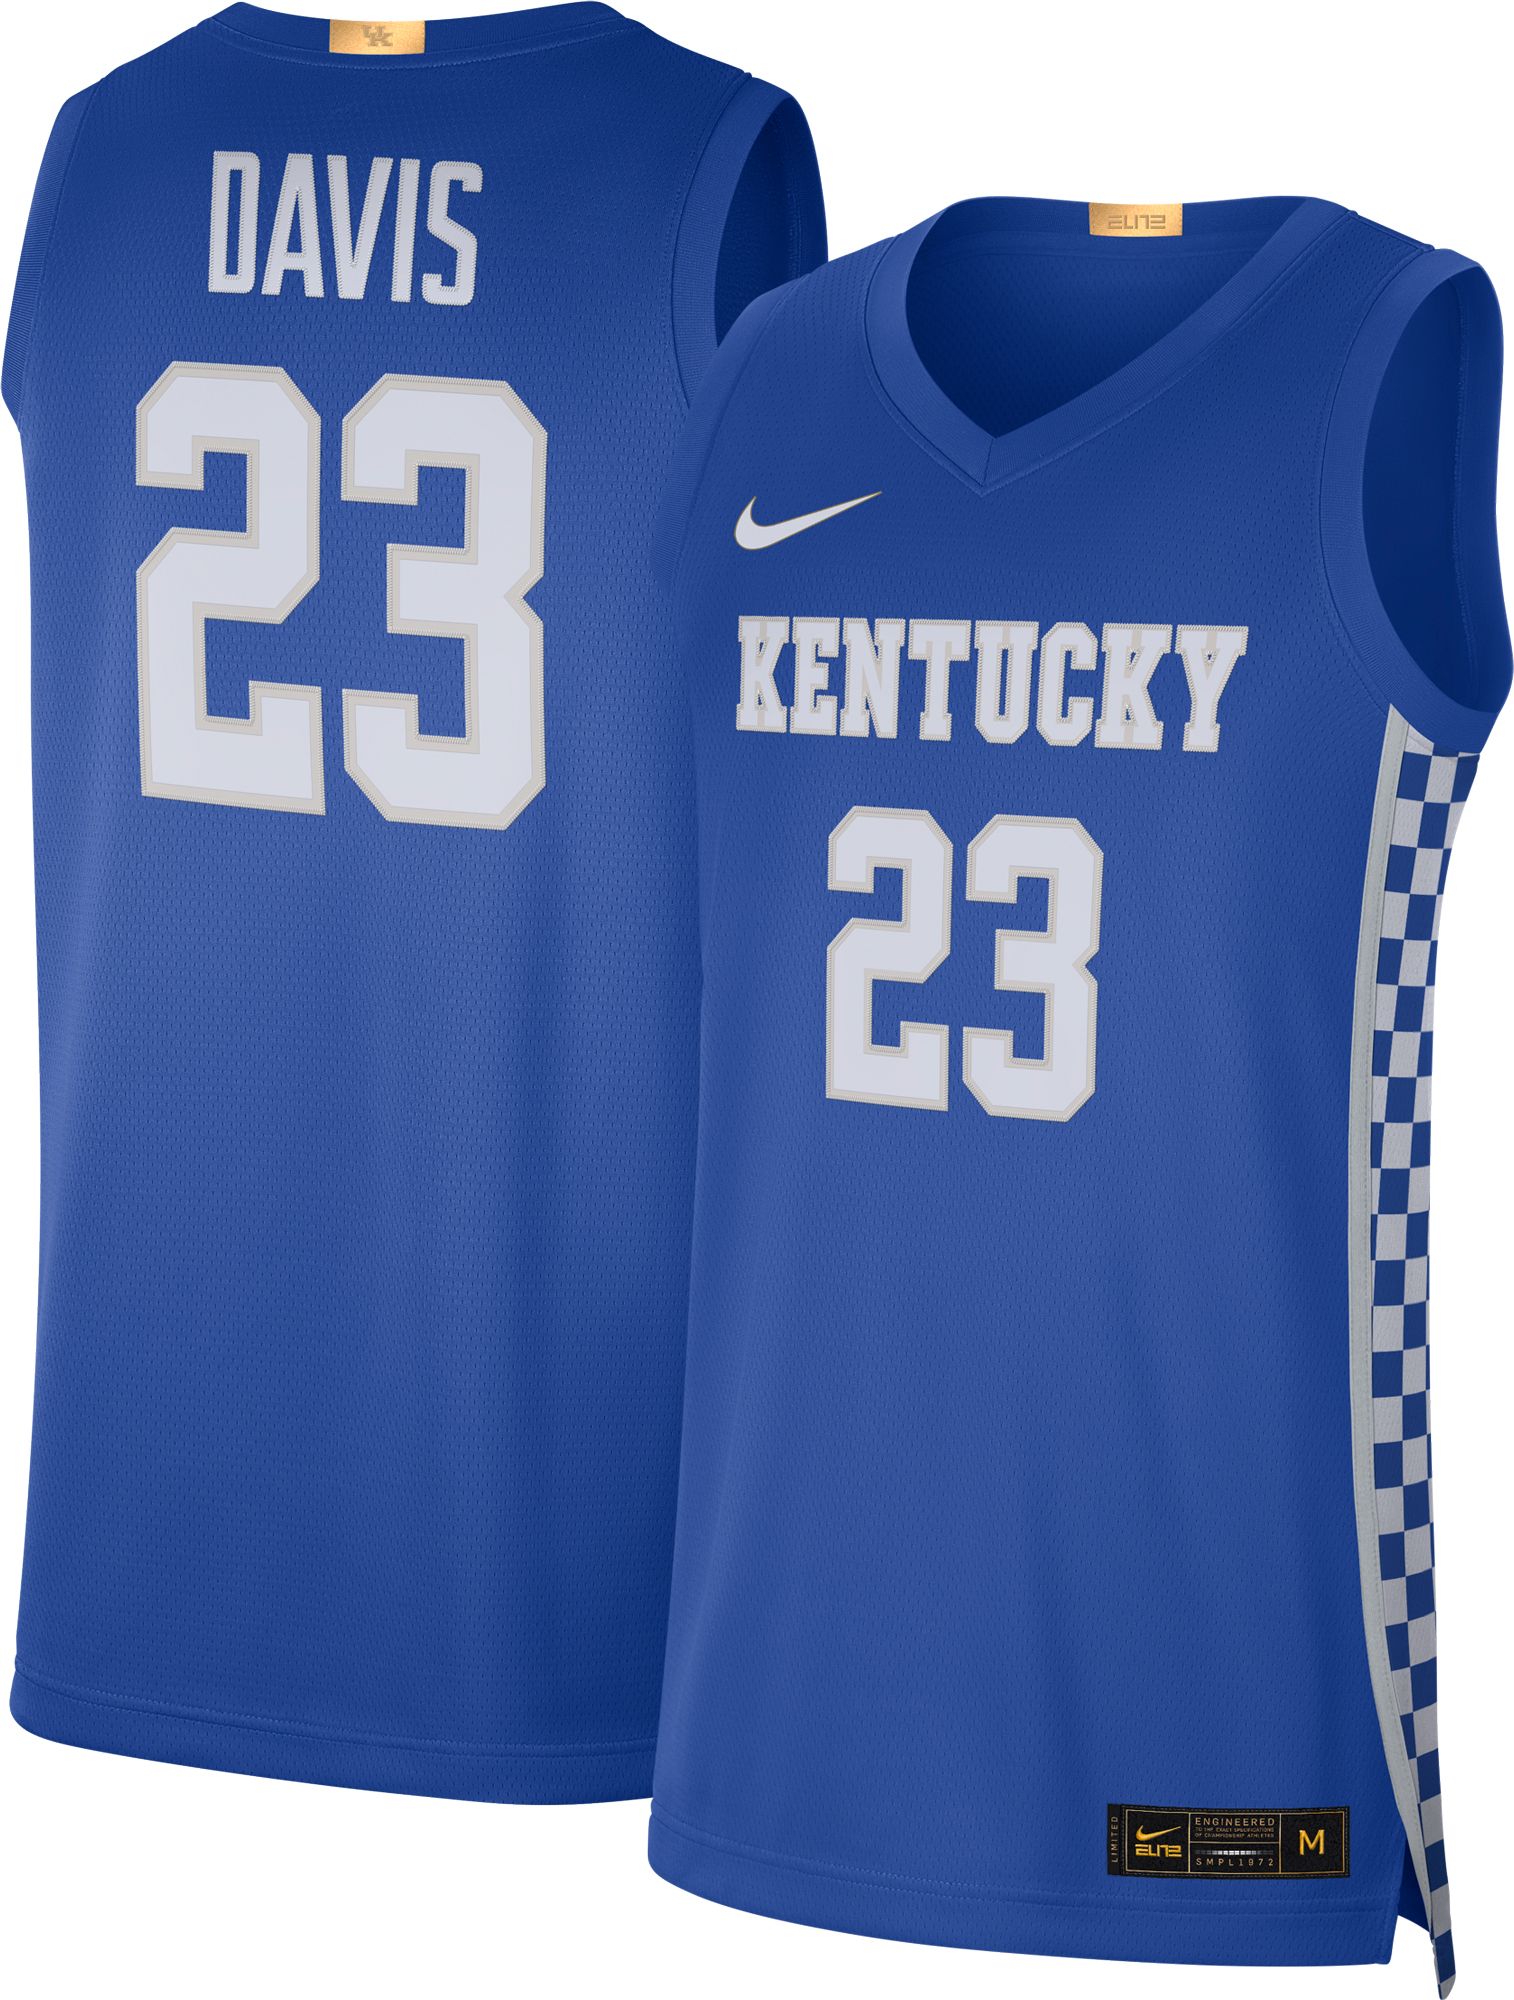 anthony davis college jersey number